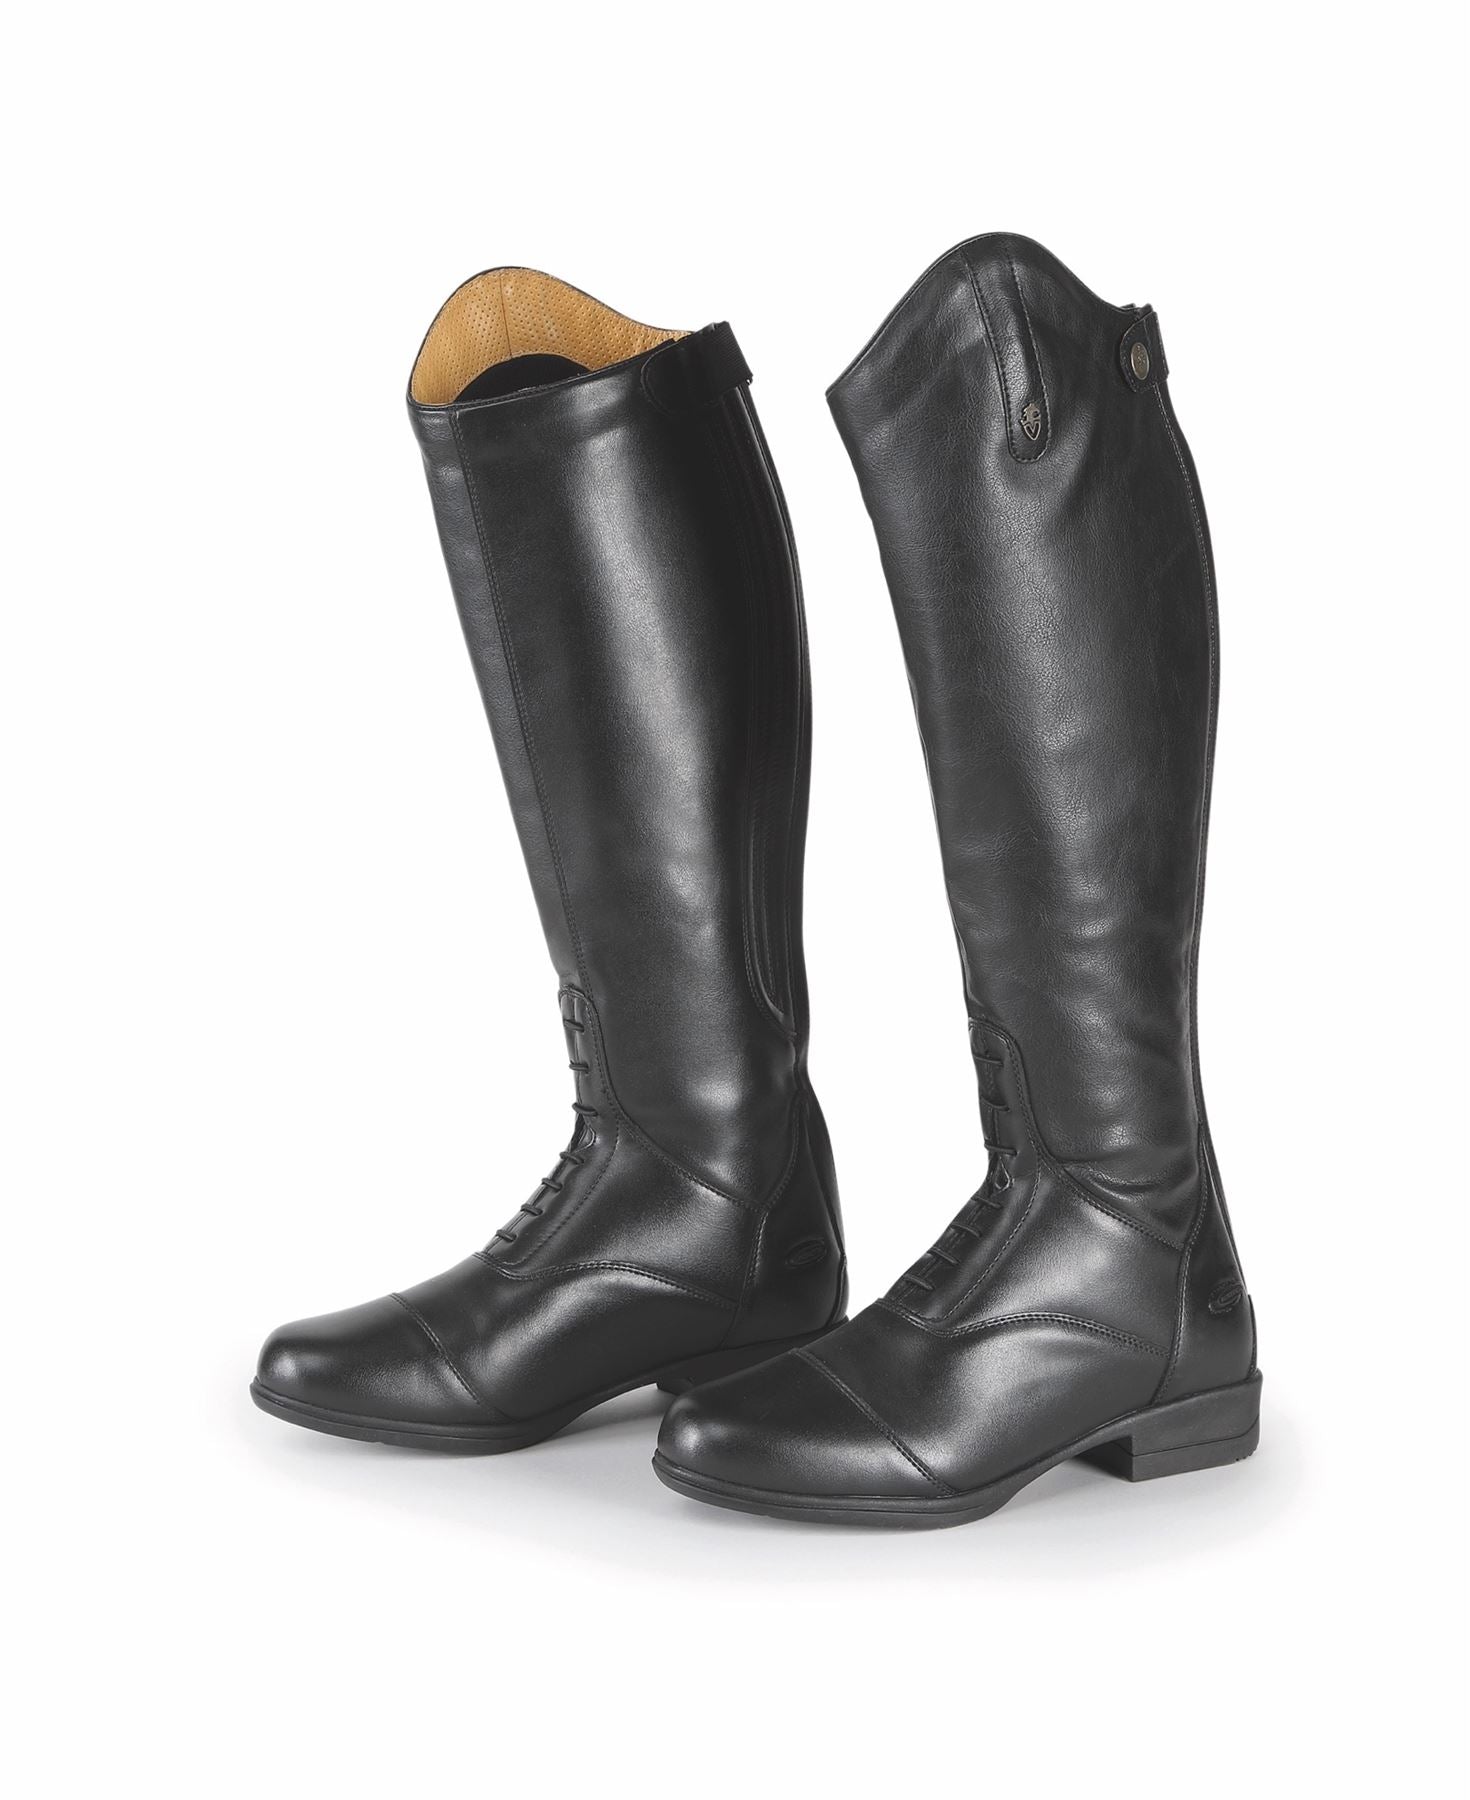 Shires Moretta Luisa Riding Boots - Child - Just Horse Riders